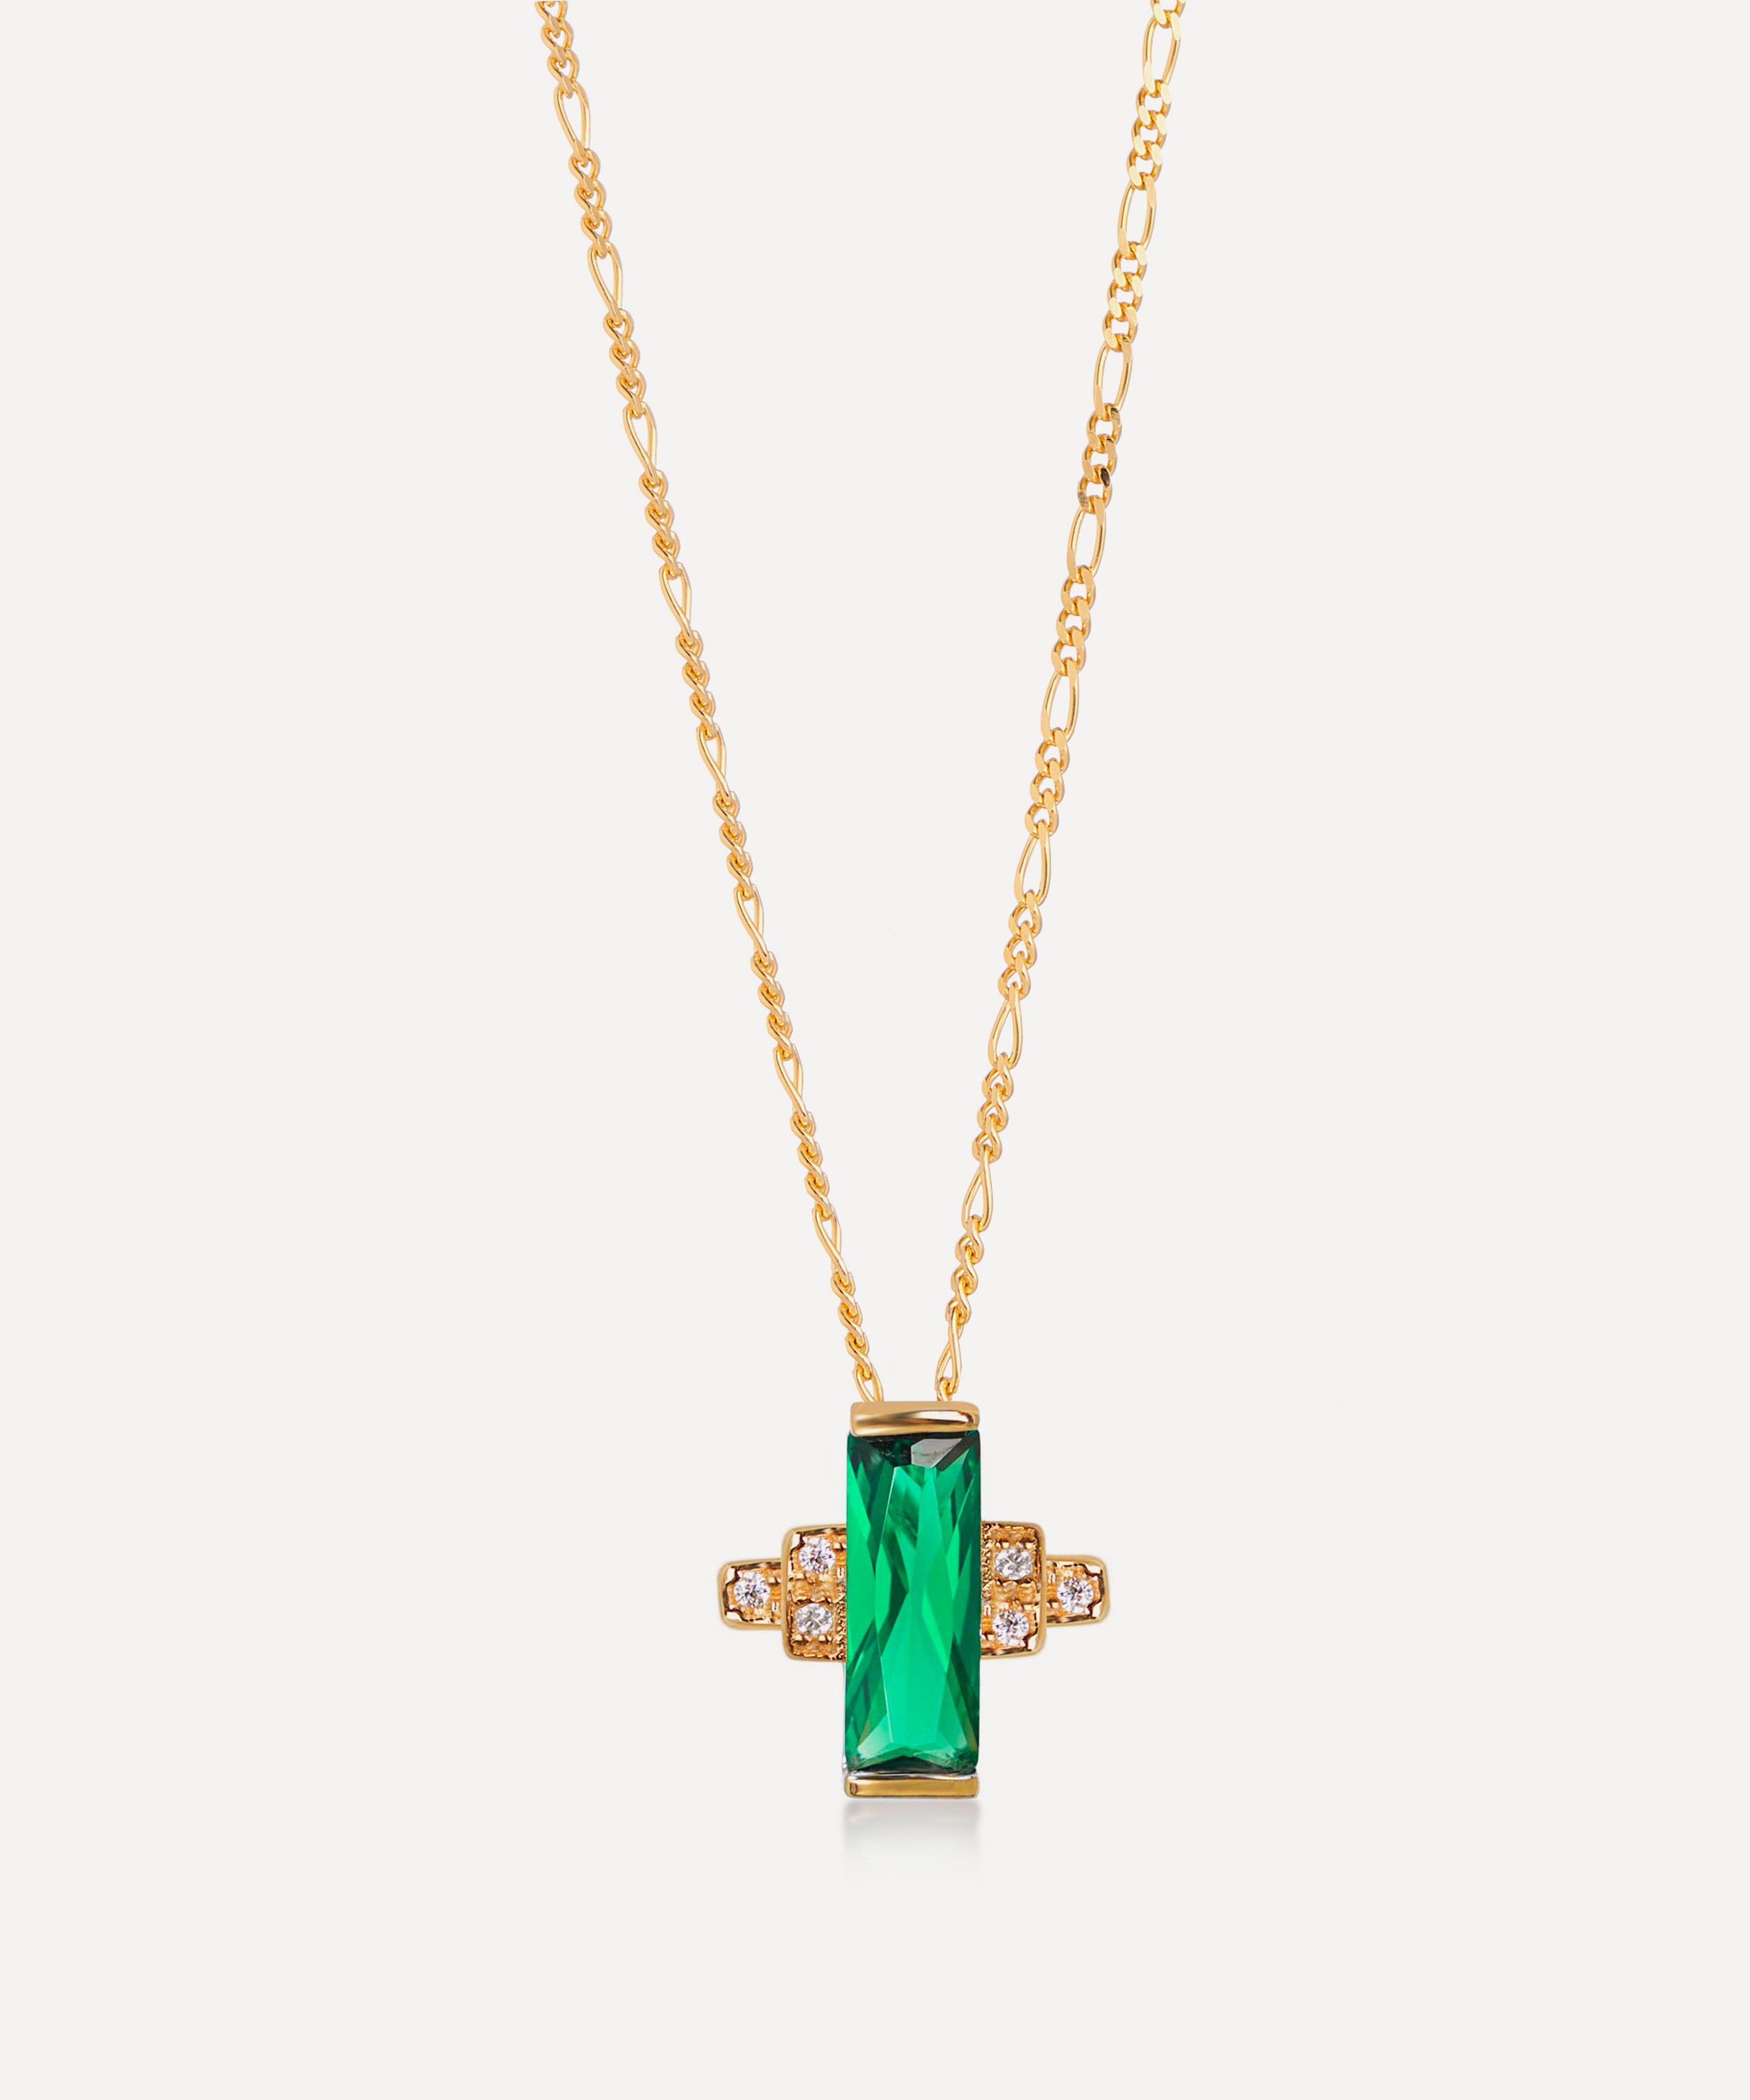 V by Laura Vann - 18ct Gold-Plated Audrey Green Pendant Necklace